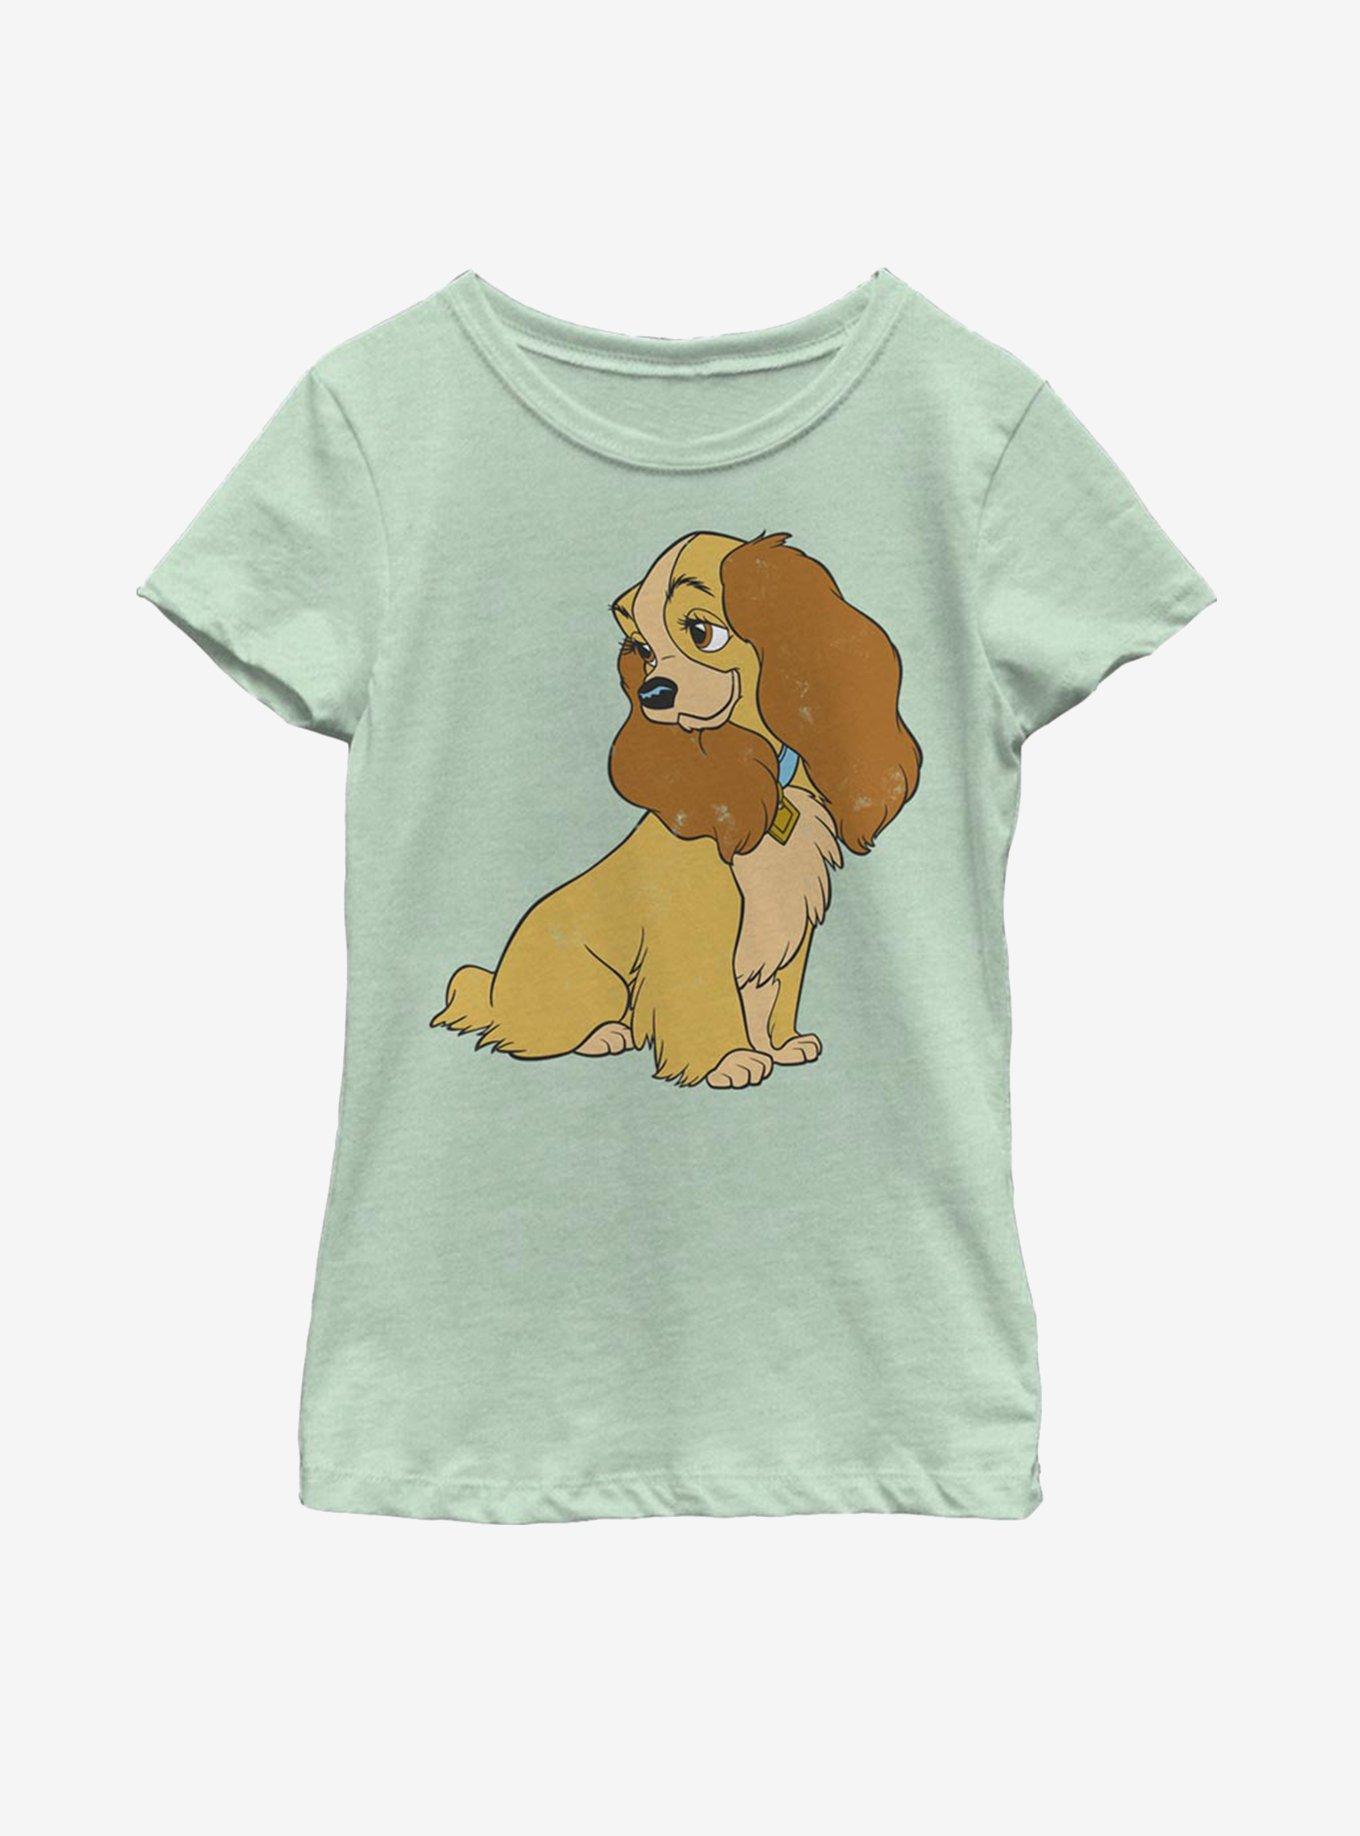 Disney Lady And The Tramp Classic Lady Youth Girls T-Shirt, MINT, hi-res